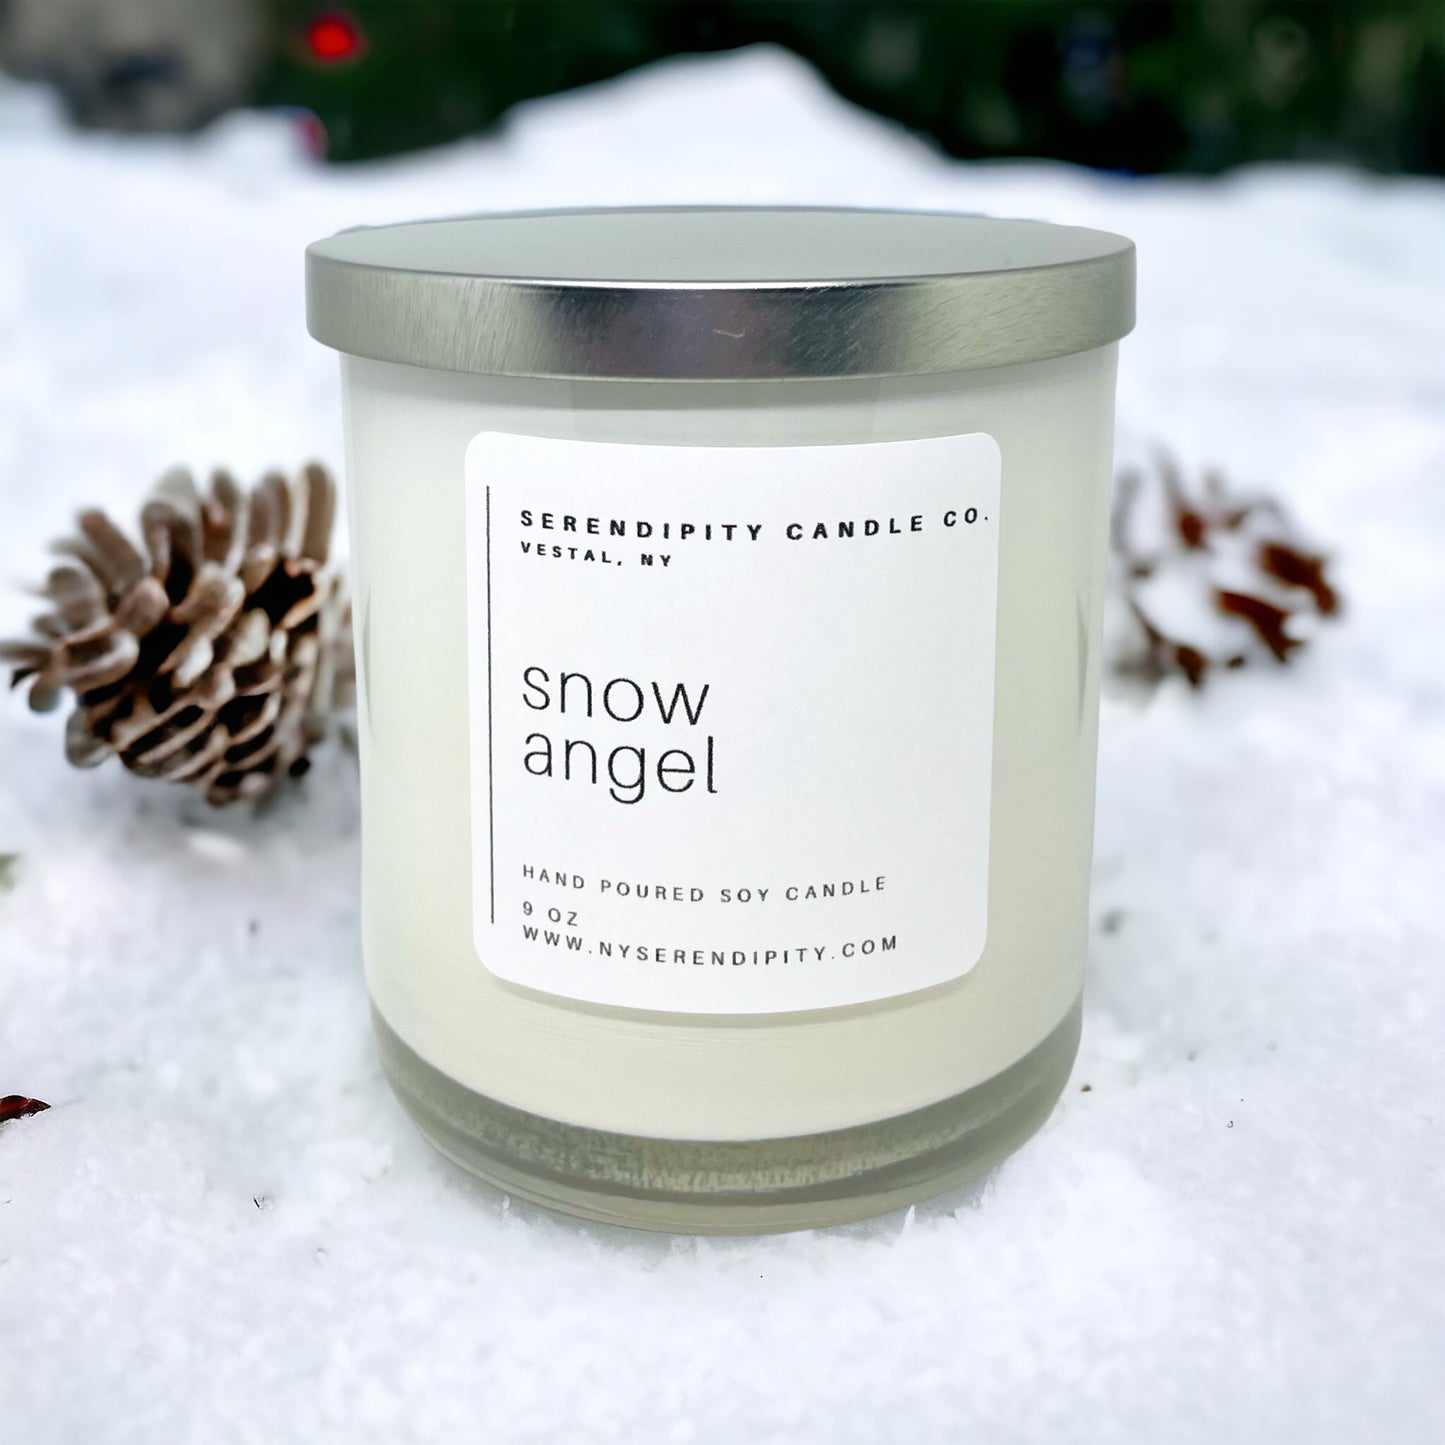 Snow Angel Soy Candle